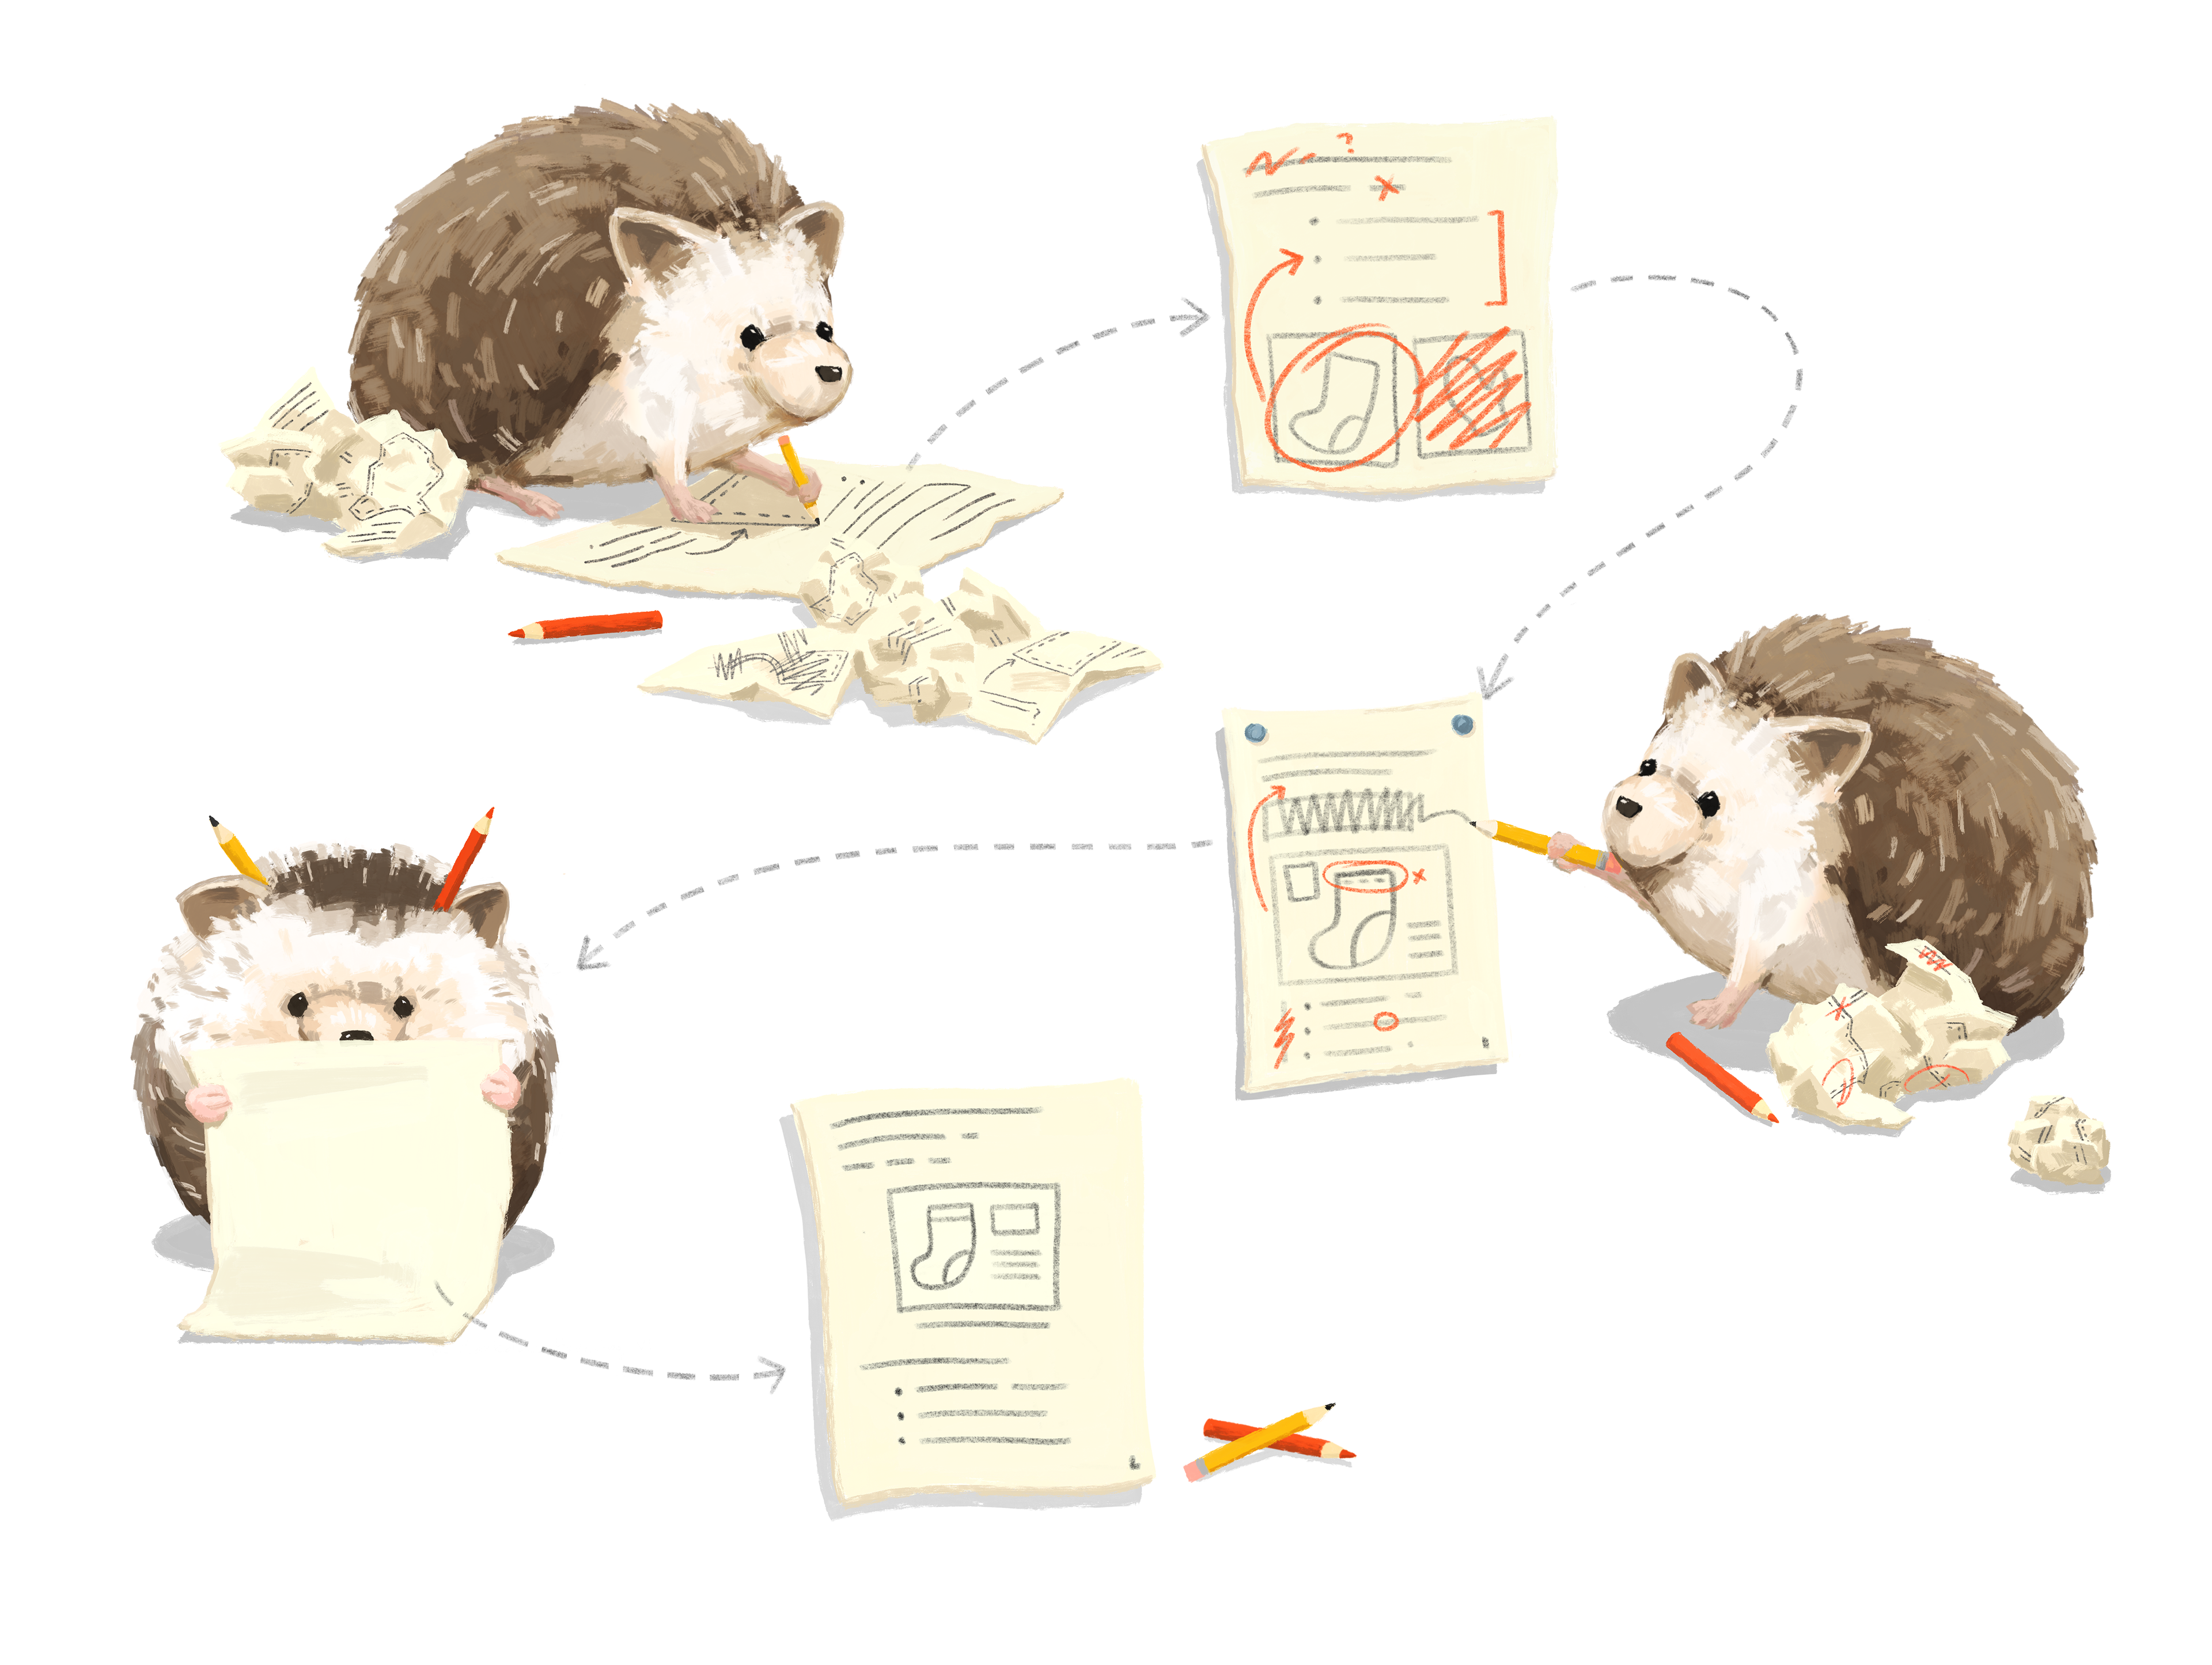 A cute illustrated hedgehog showing multiple steps of writing, editing, and iterating on a notebook.